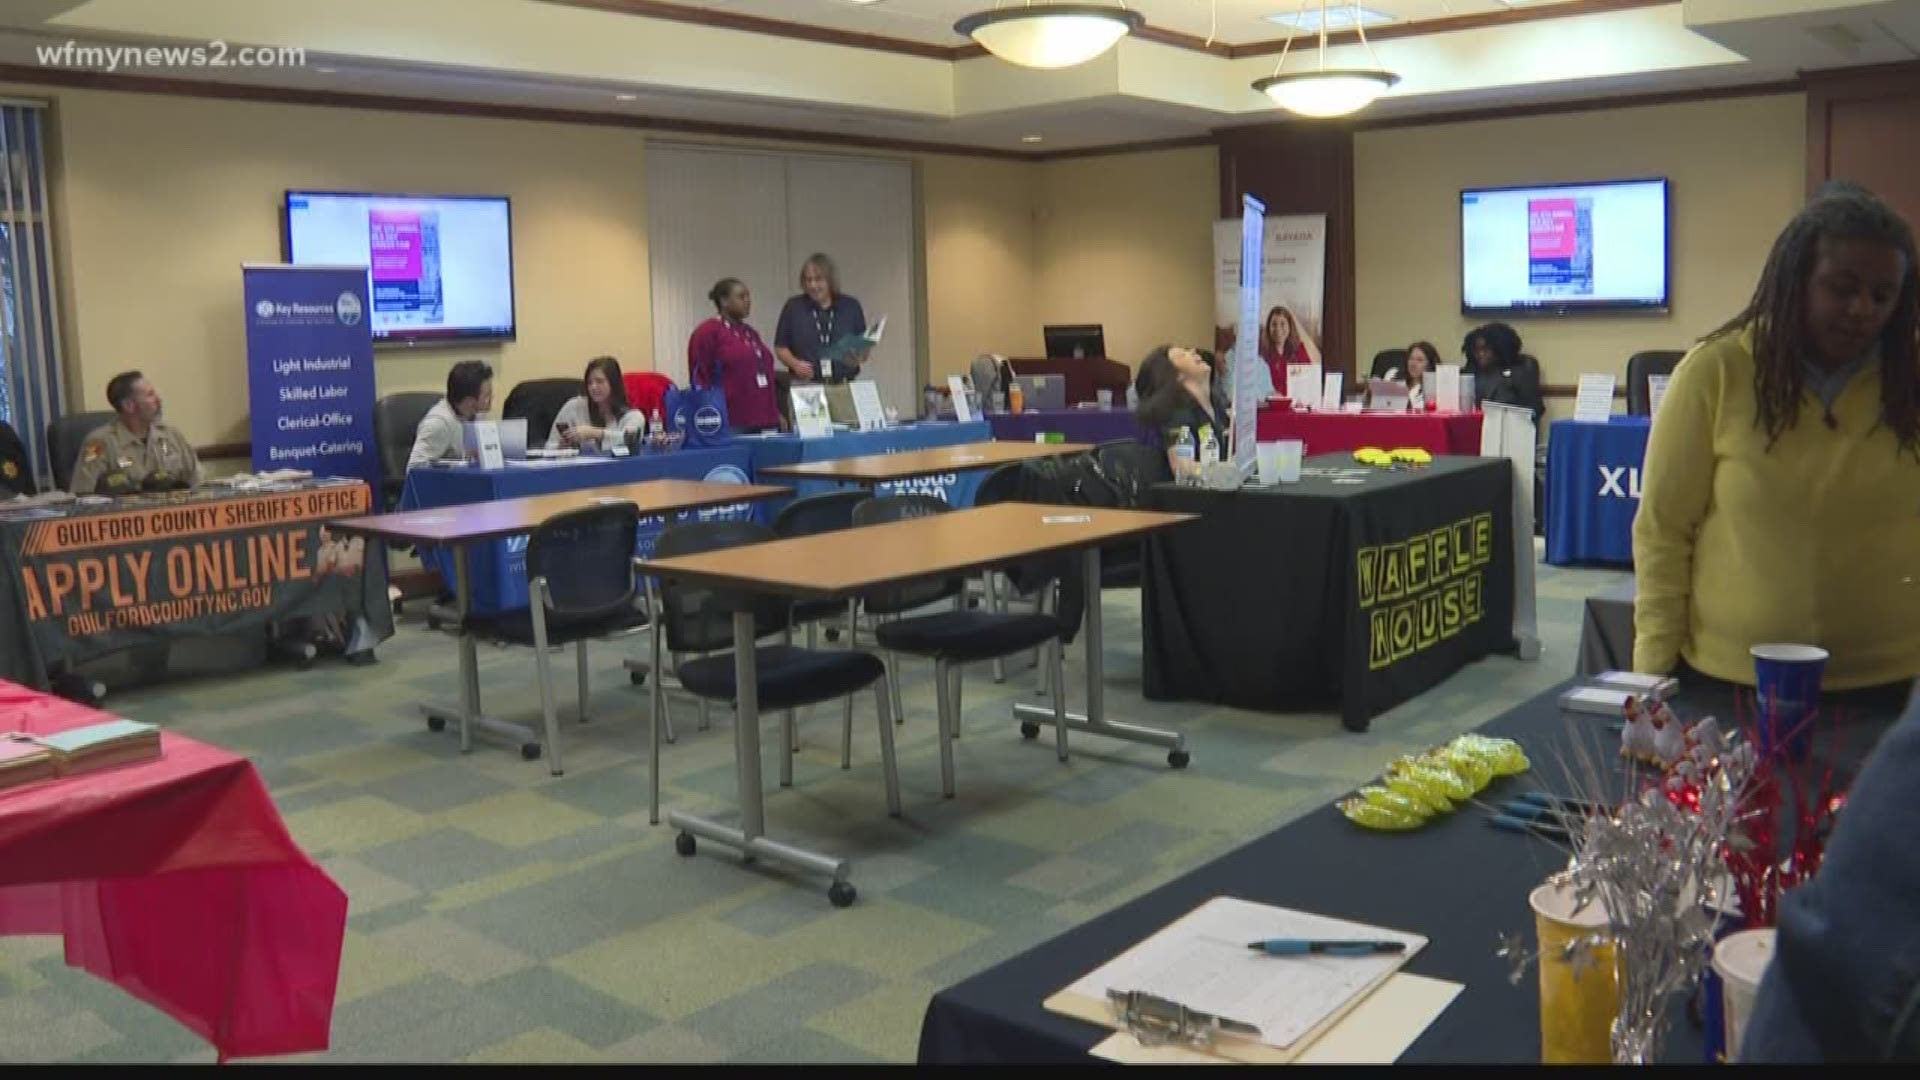 Career Center of the Carolinas holding conference call to help unemployed workers